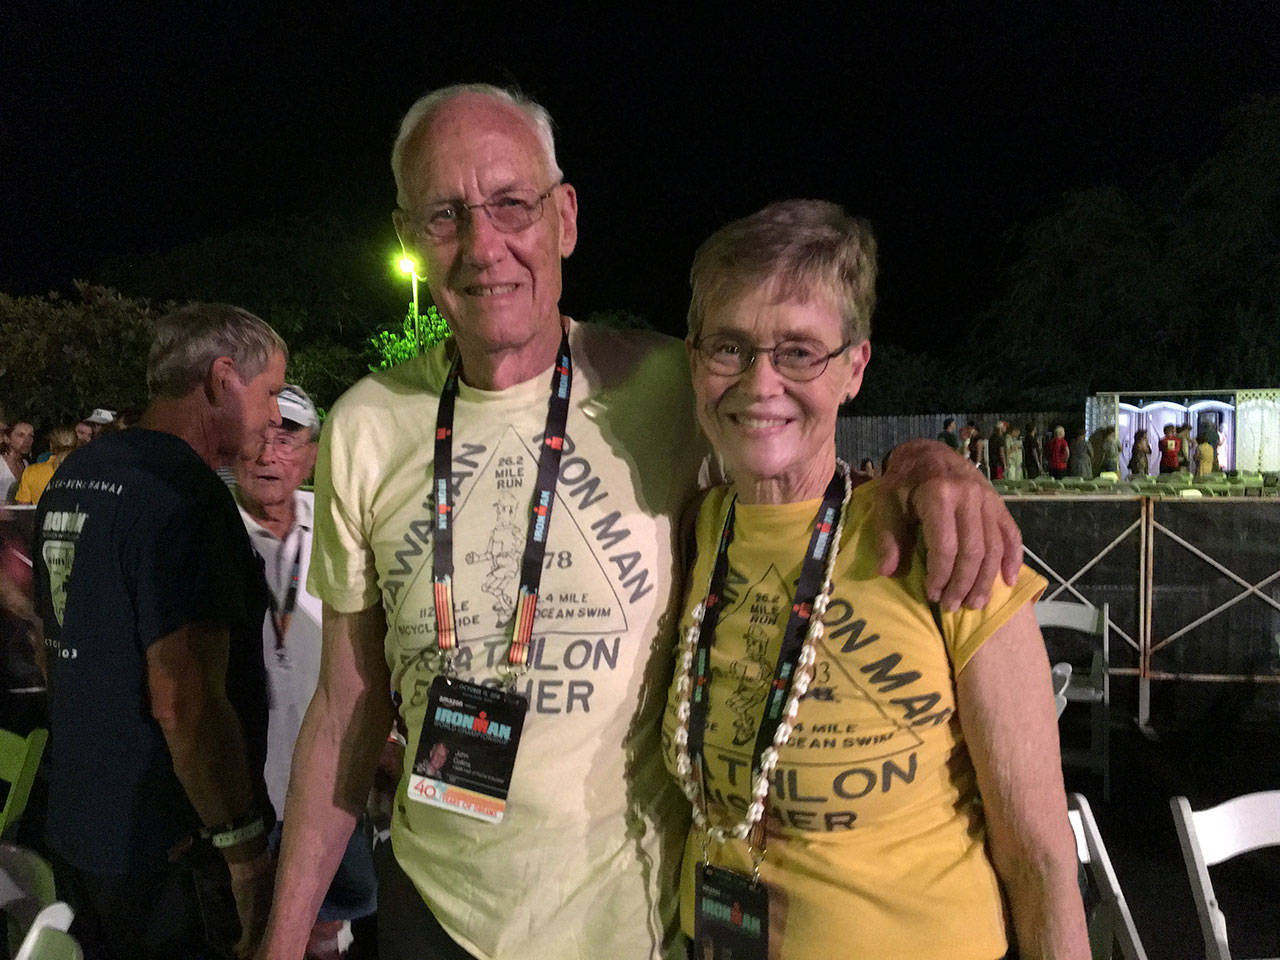 John and Judy Collins, founders of the Ironman Triathlon, attended the 40th anniversary of the event in 2018. (Submitted photo)